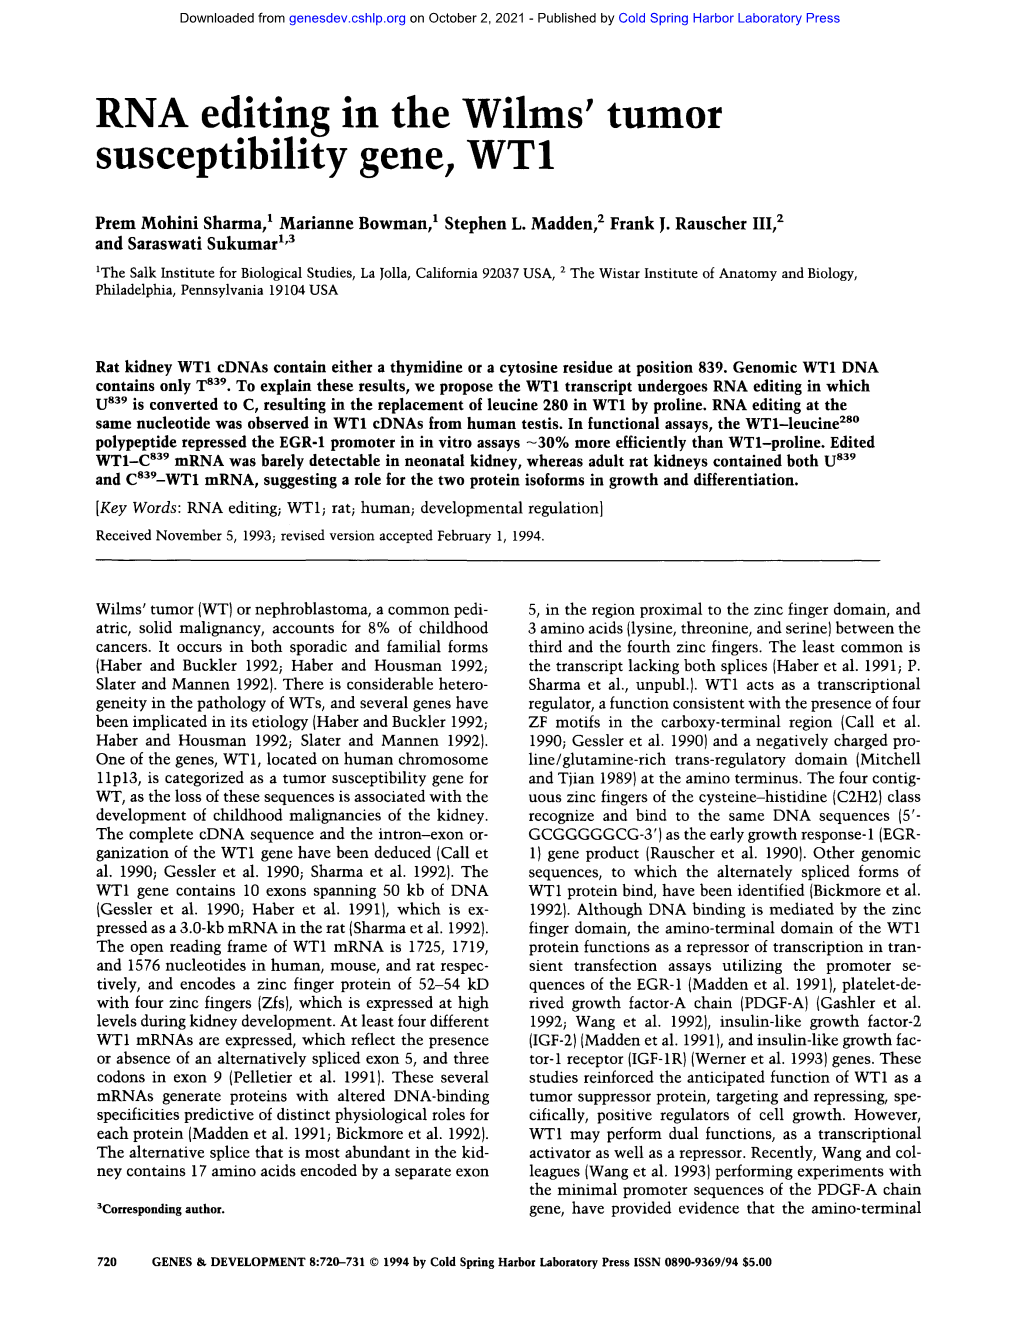 RNA Editing in the Wilms' Tumor Susceptibility Gene, Wtl